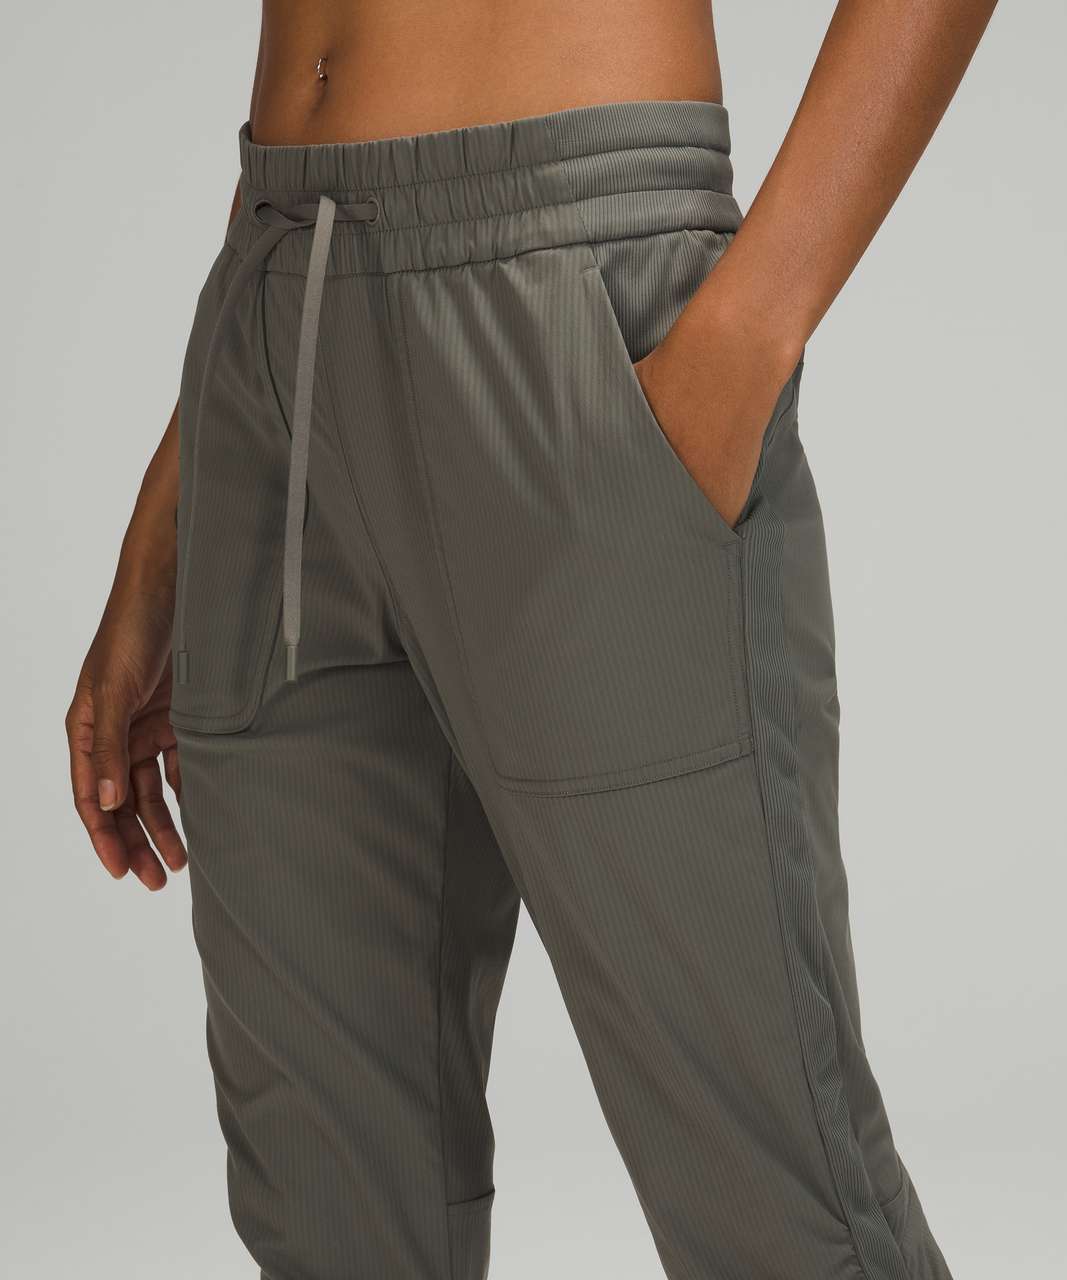 First time flop: Beyond the Studio Jogger (grey sage, size 6) : r